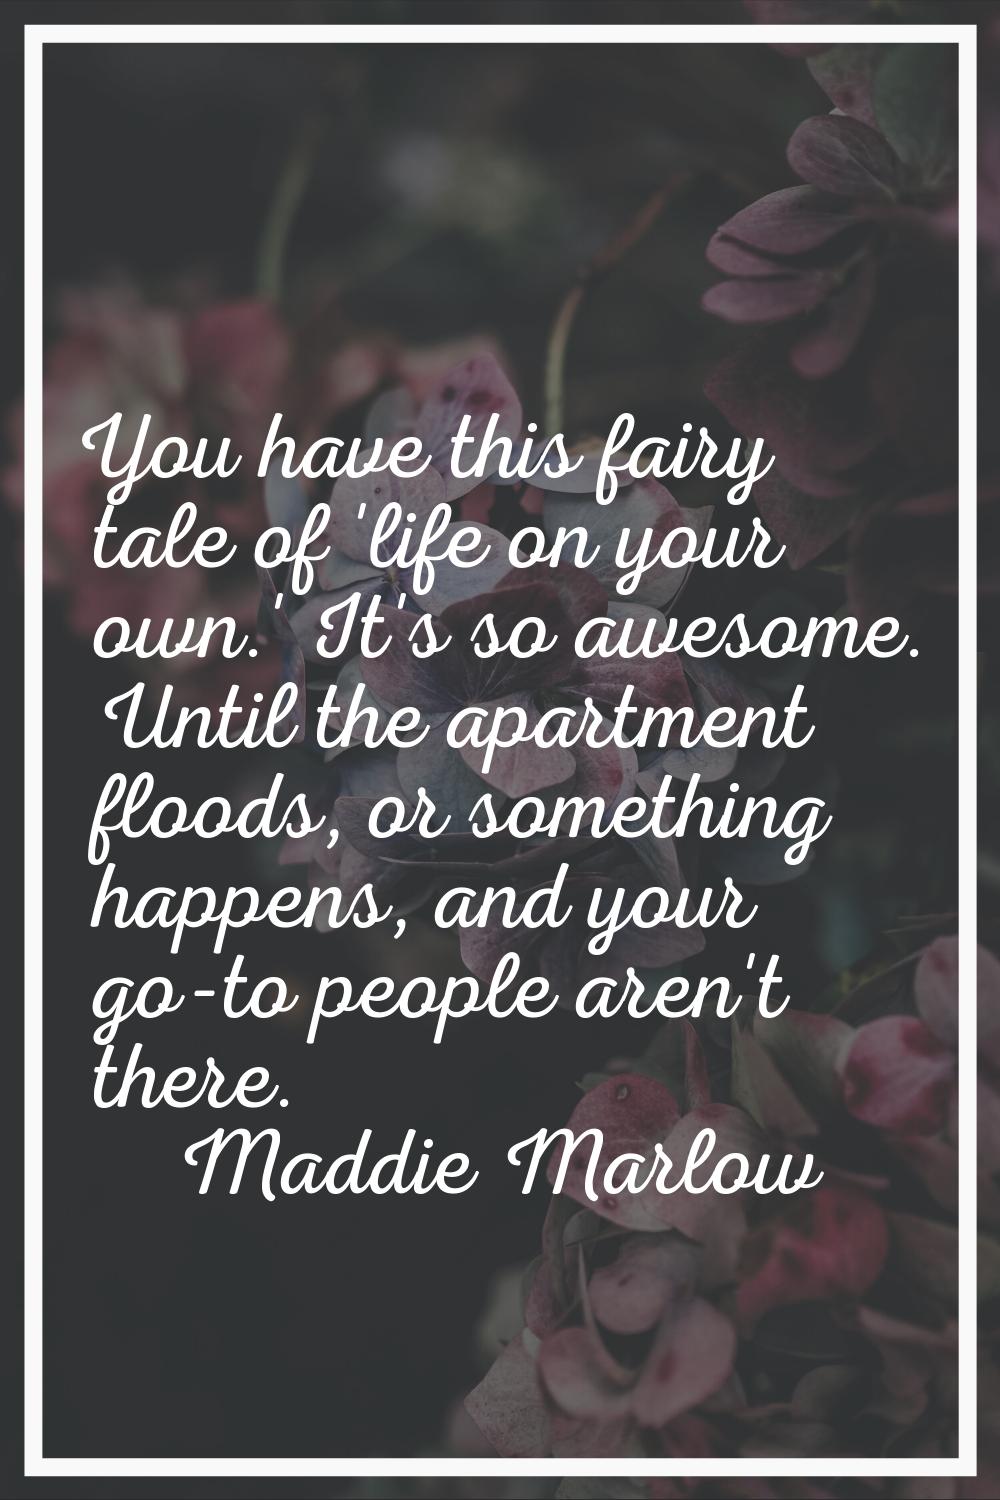 You have this fairy tale of 'life on your own.' It's so awesome. Until the apartment floods, or som